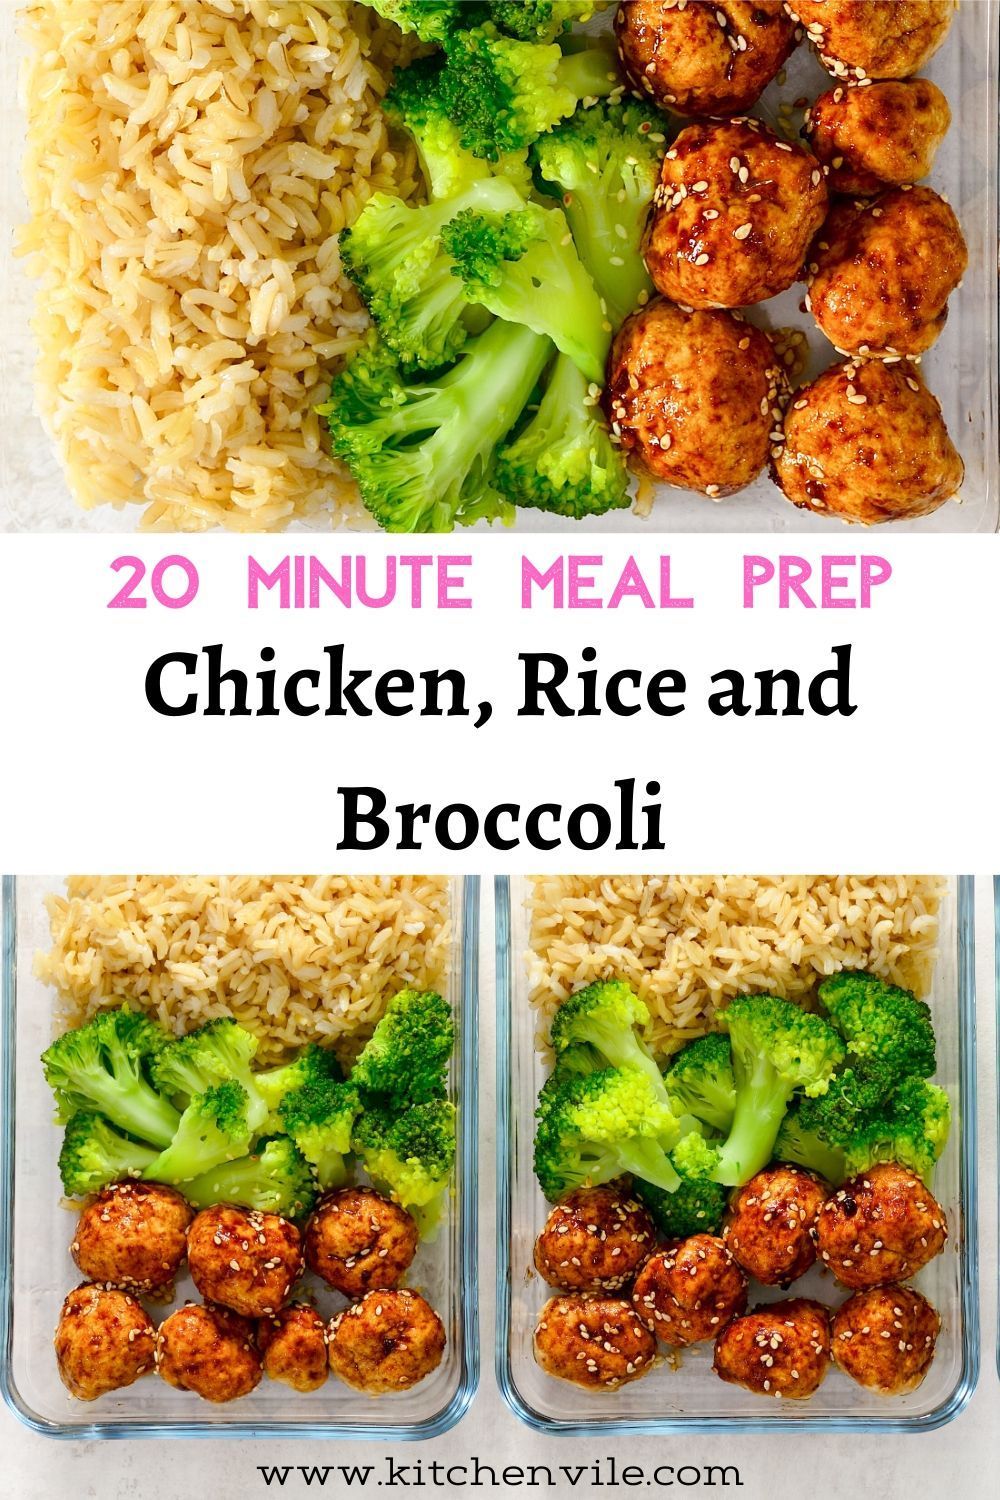 19 healthy recipes Meal Prep families ideas